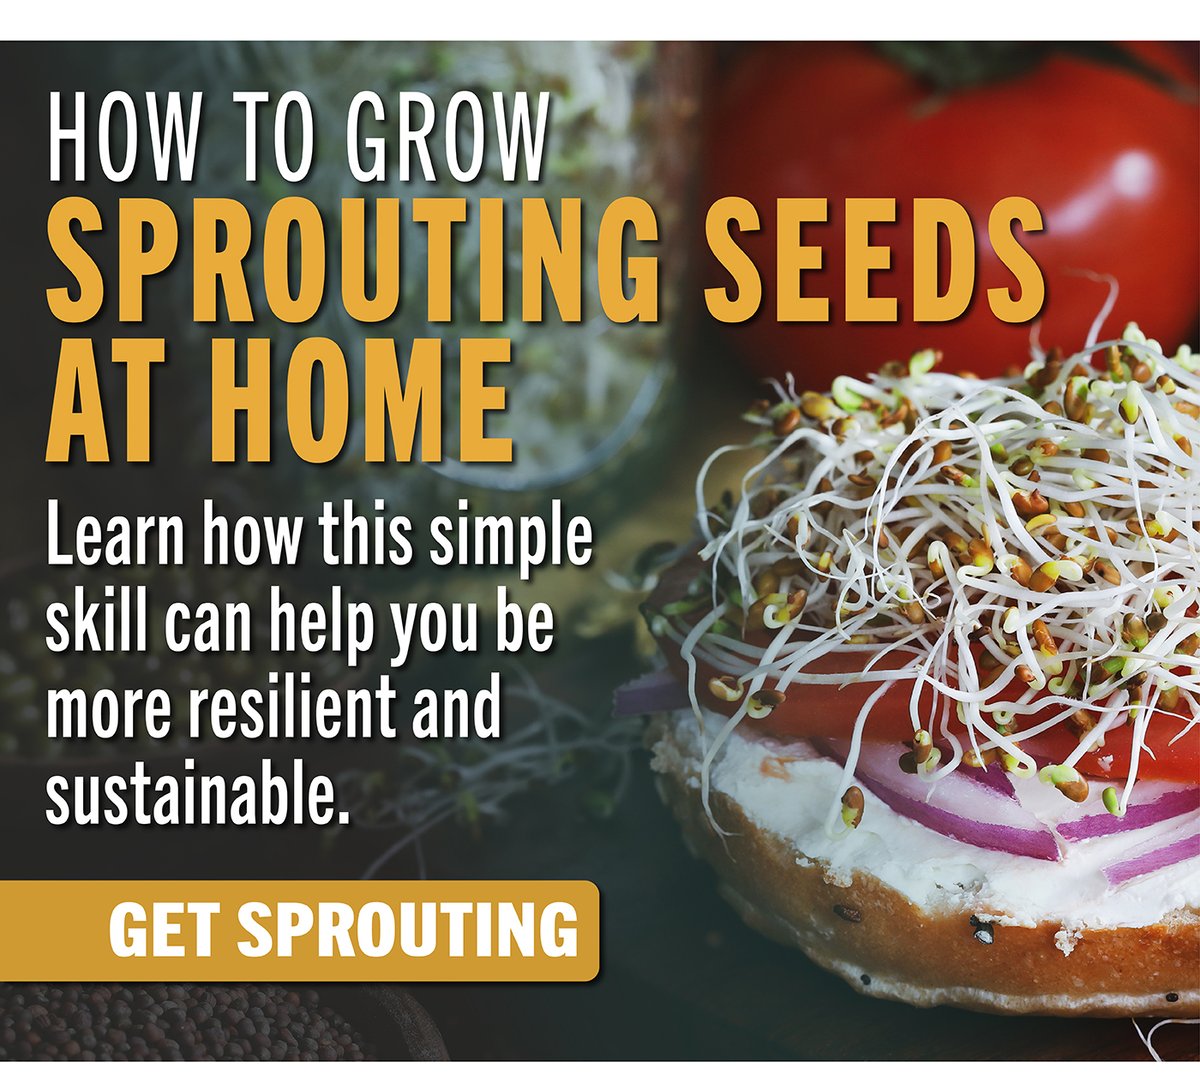 How to Grow Sprouting Seeds